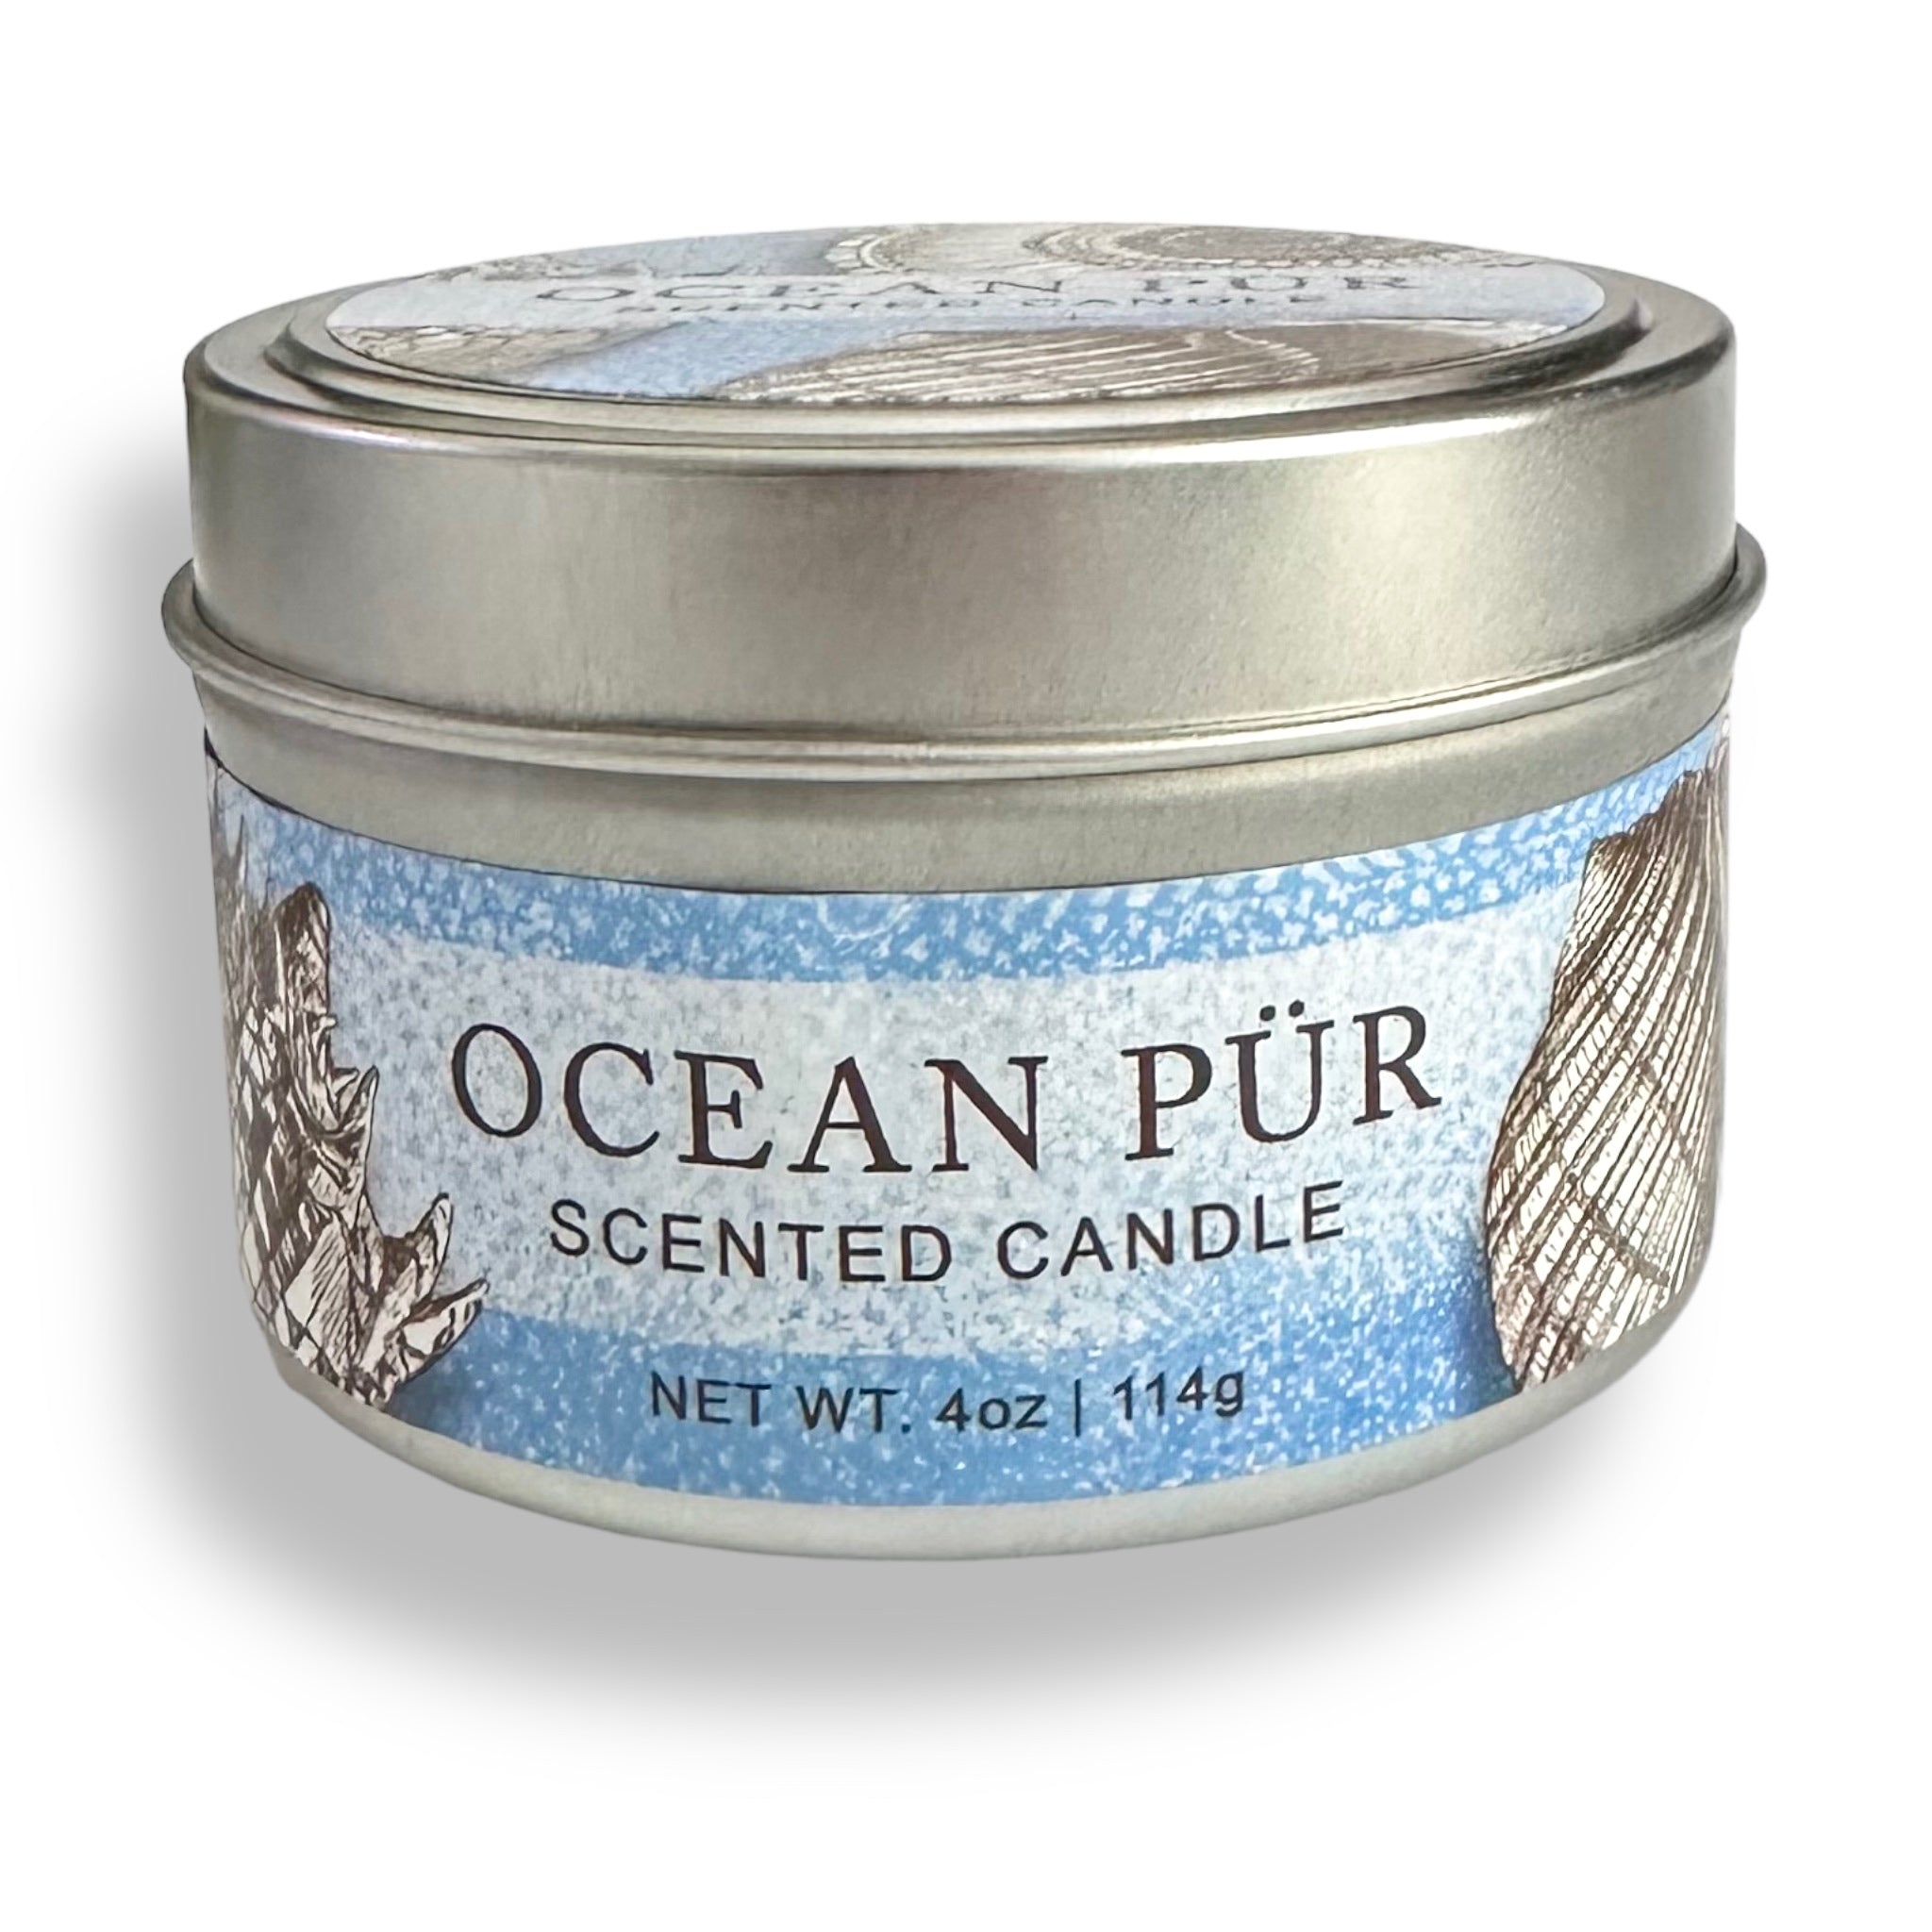 Greenwich Bay Trading Company OCEAN PUR Candle